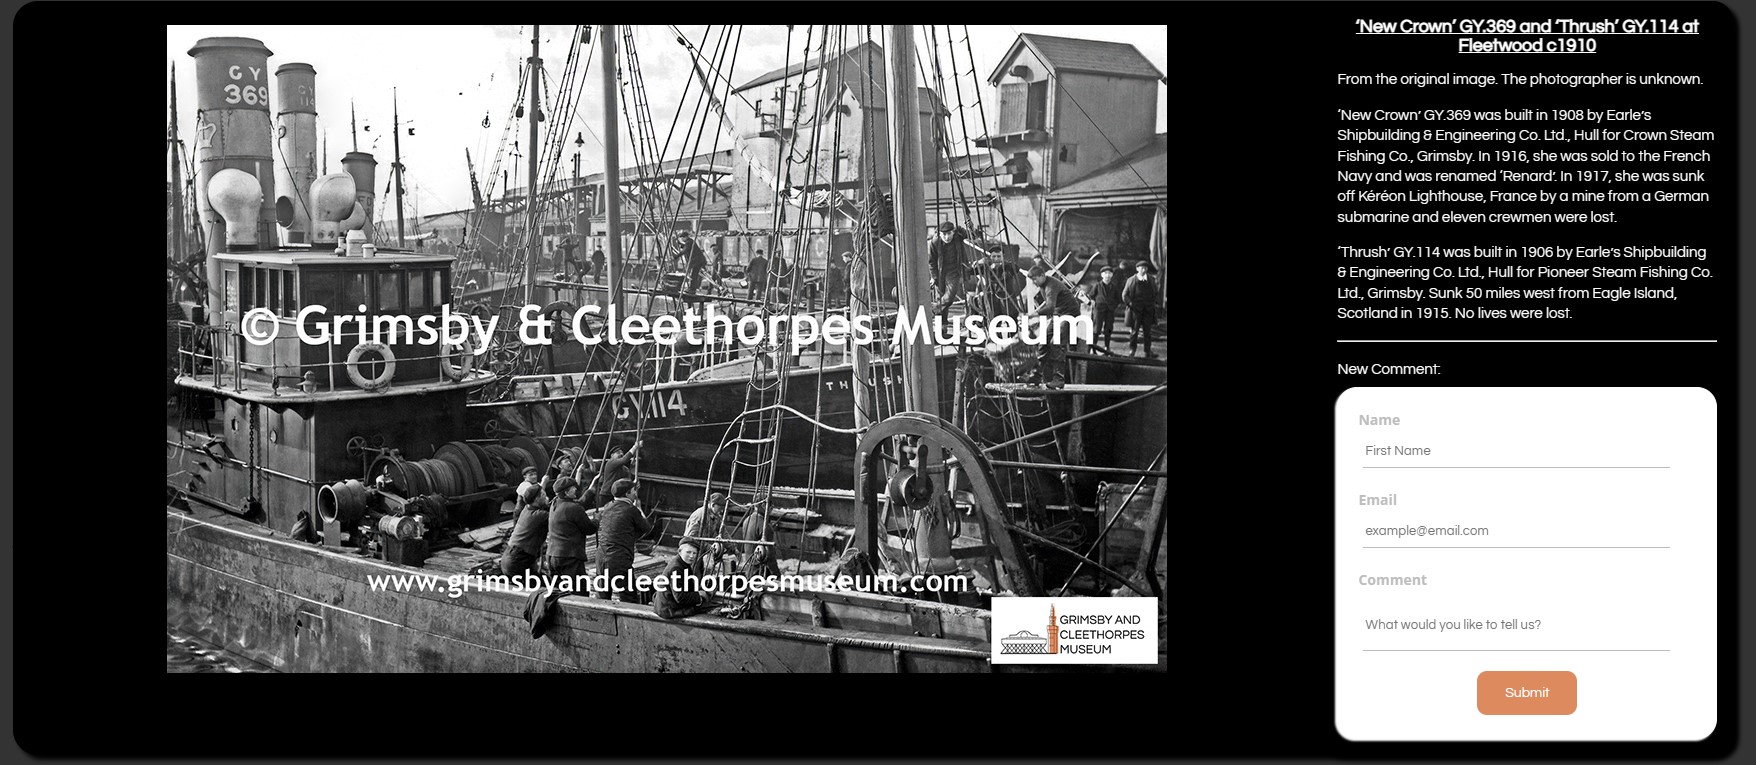 GRIMSBY AND CLEETHORPES MUSEUM